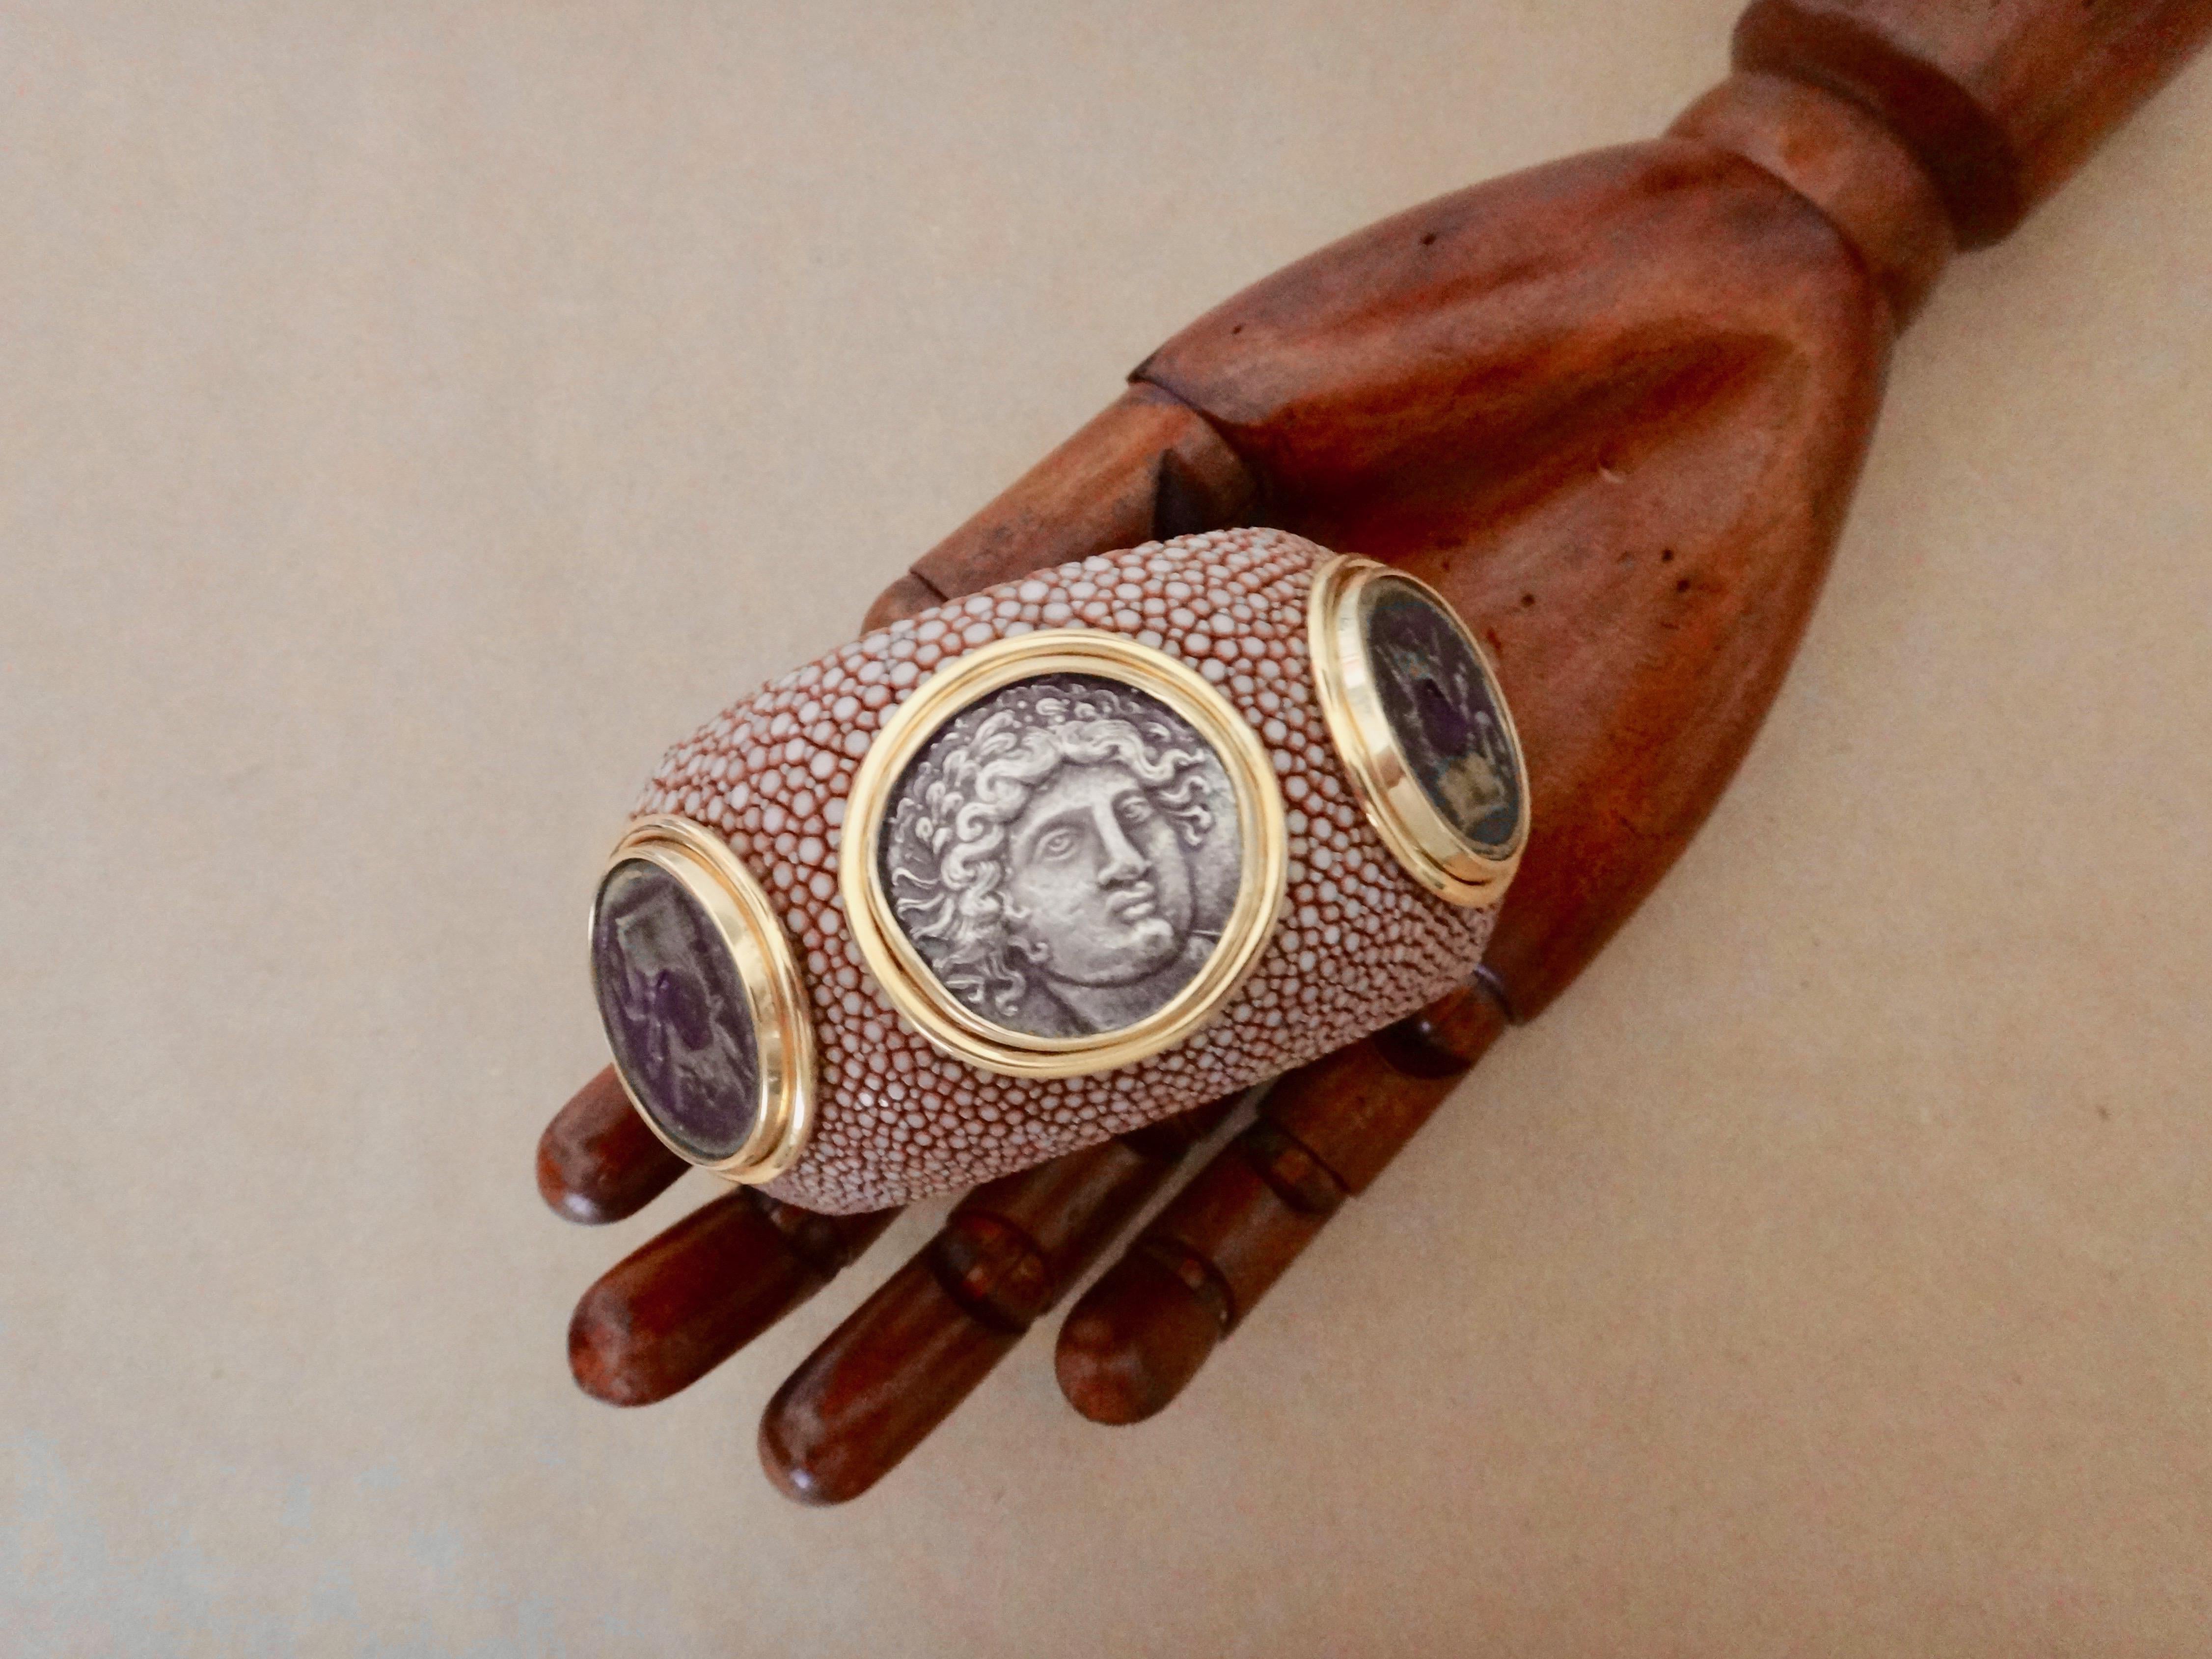 A milk chocolate colored shagreen (string-ray) cuff is decorated with three coins featuring images of Alexander the Great and the Minotour.  Cast in silver and bronze, the coins are set in handmade frames of 18k yellow gold and riveted onto the